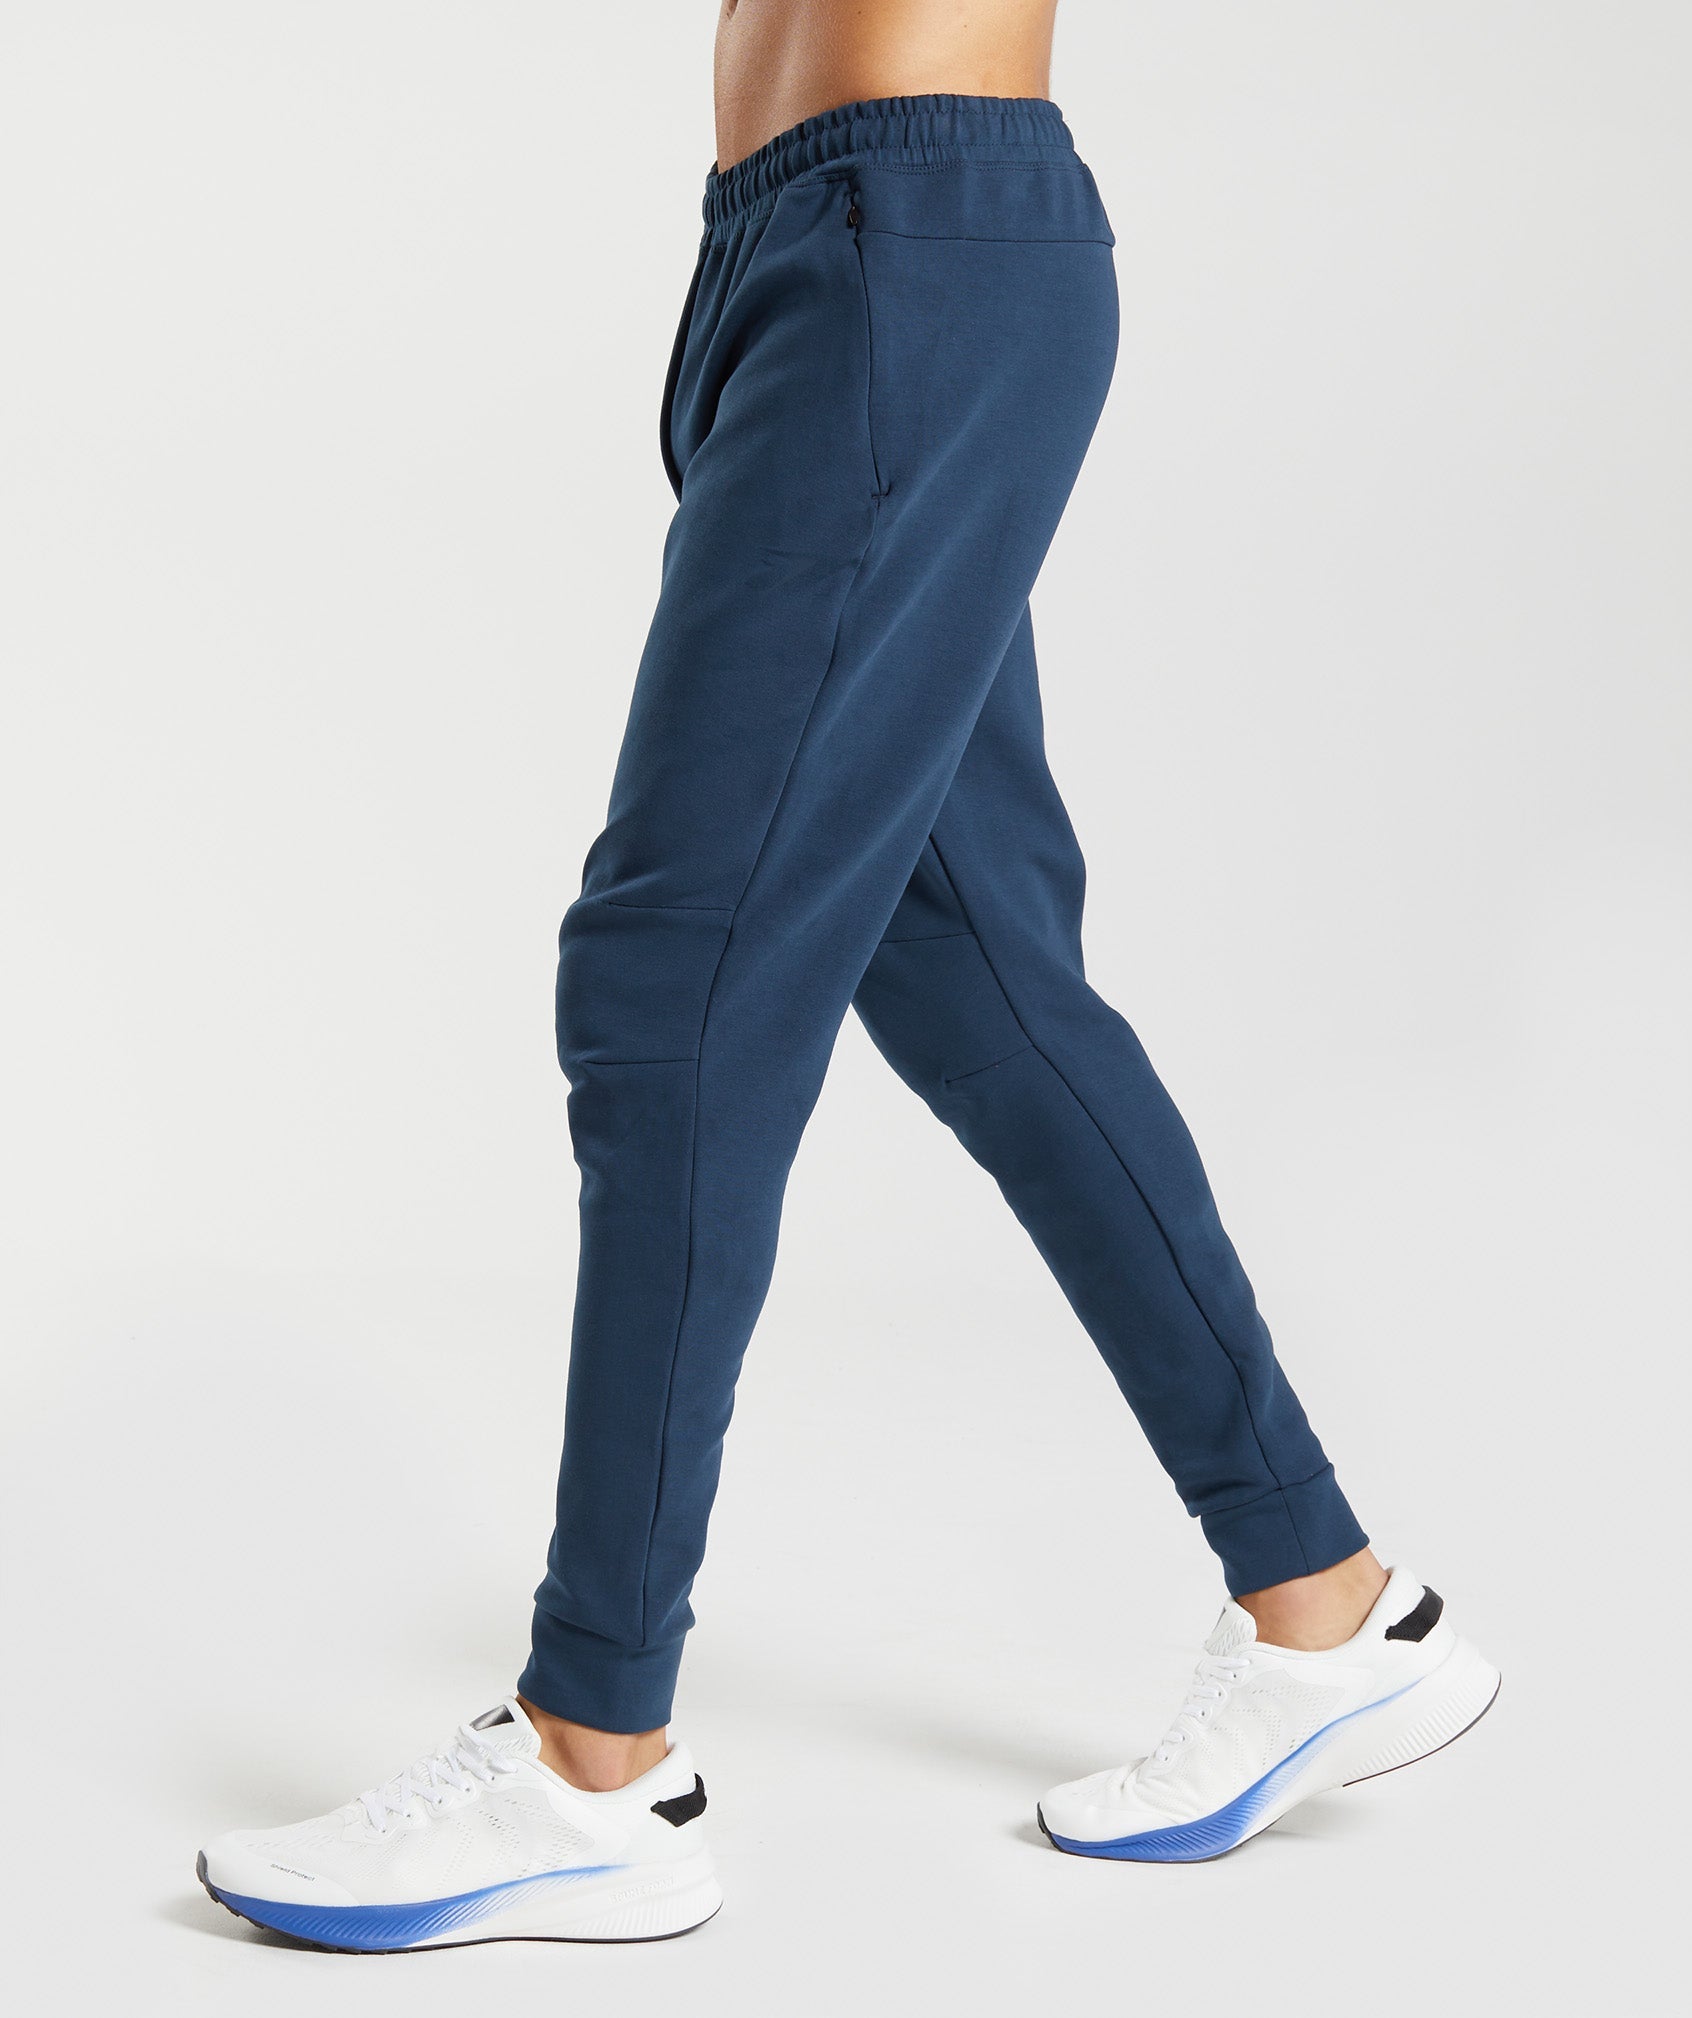 Rest Day Knit Joggers in Navy - view 3